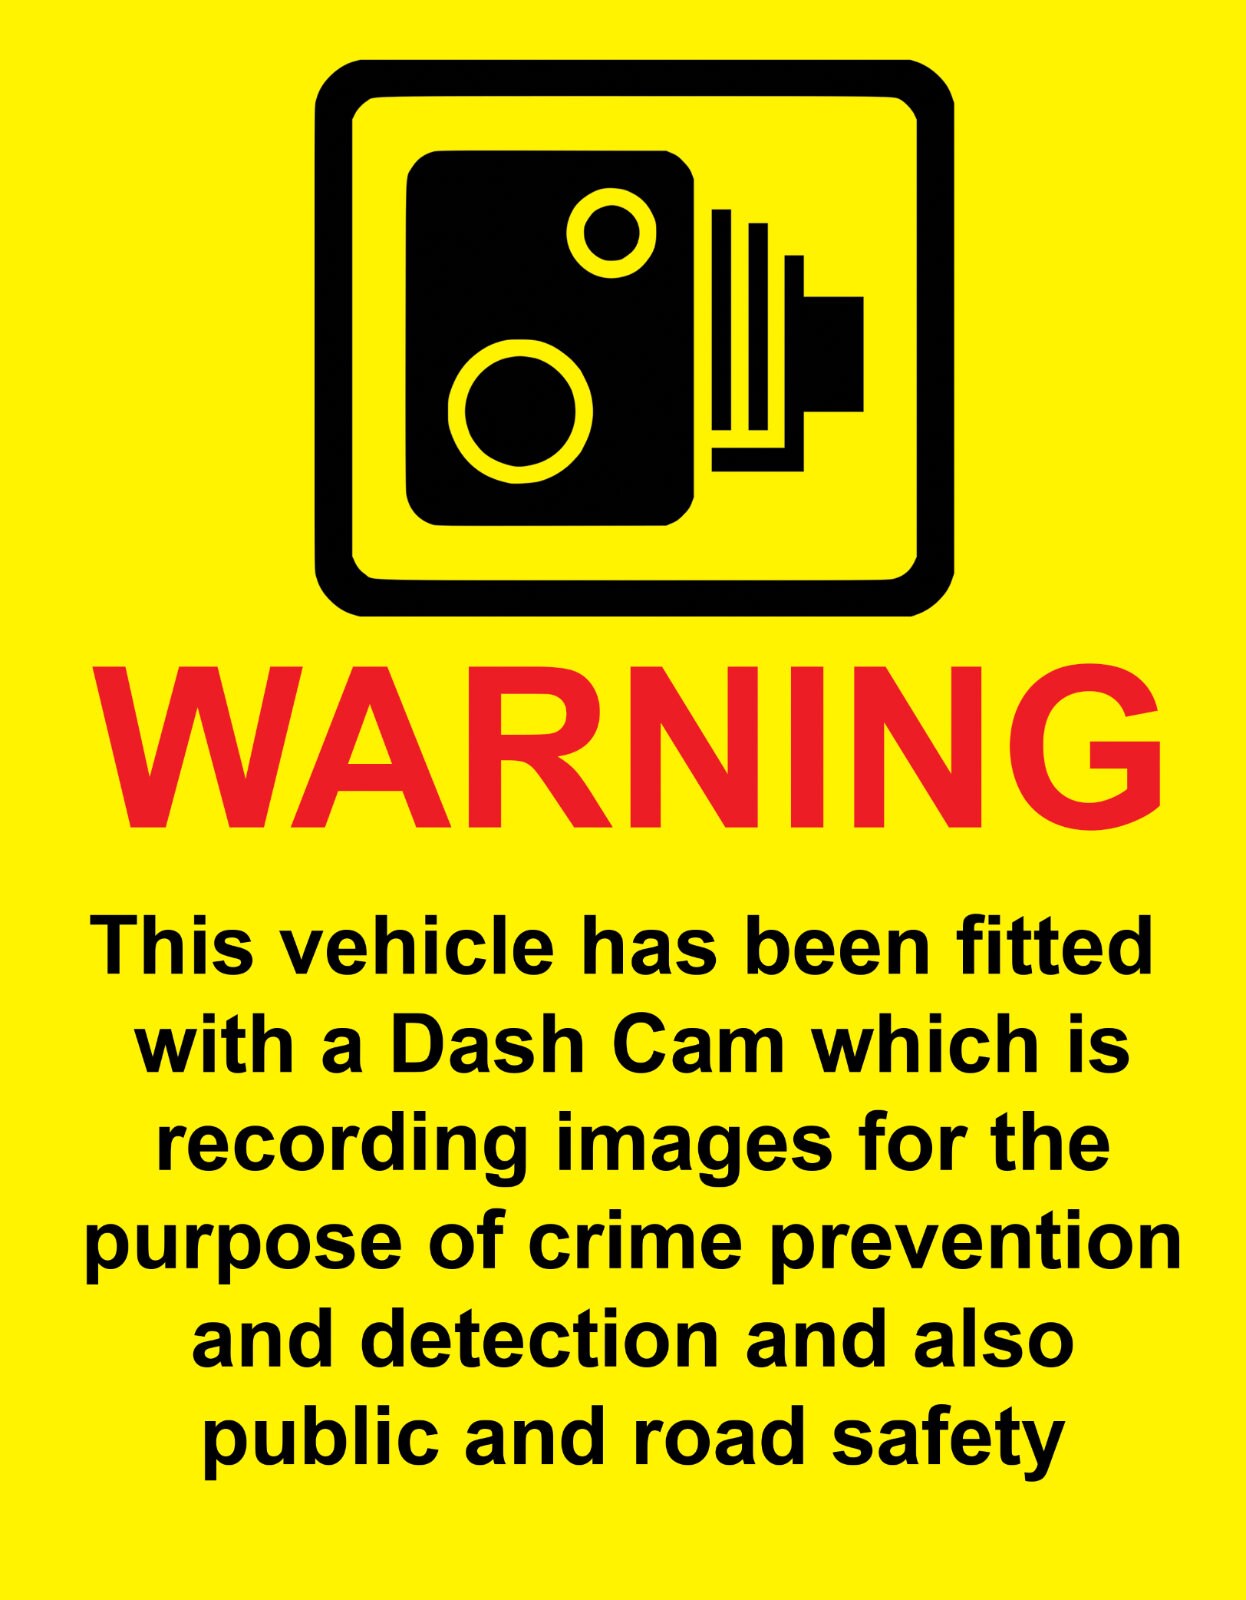 Sign Adhesive Sticker Notice Warning Vehicle Fitted with Dash Cam Crime Prevent 